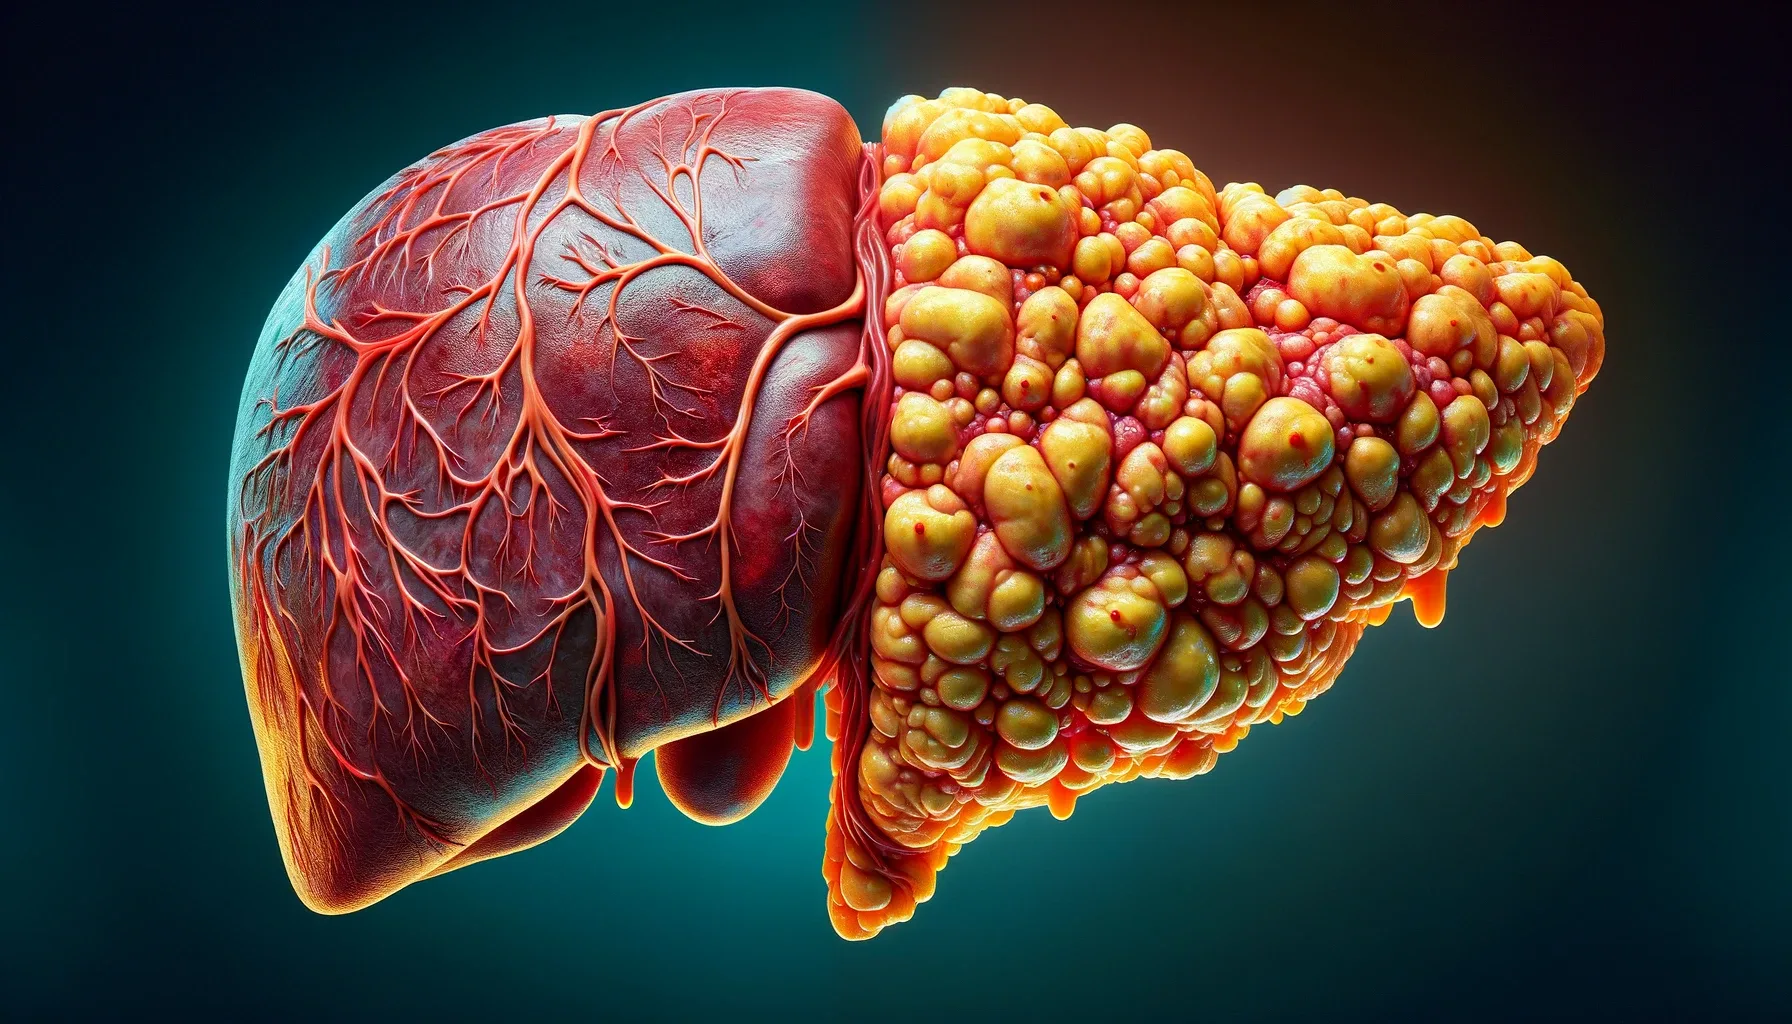 An image depicting the difference between a healthy liver and one with fatty liver disease (NAFLD).